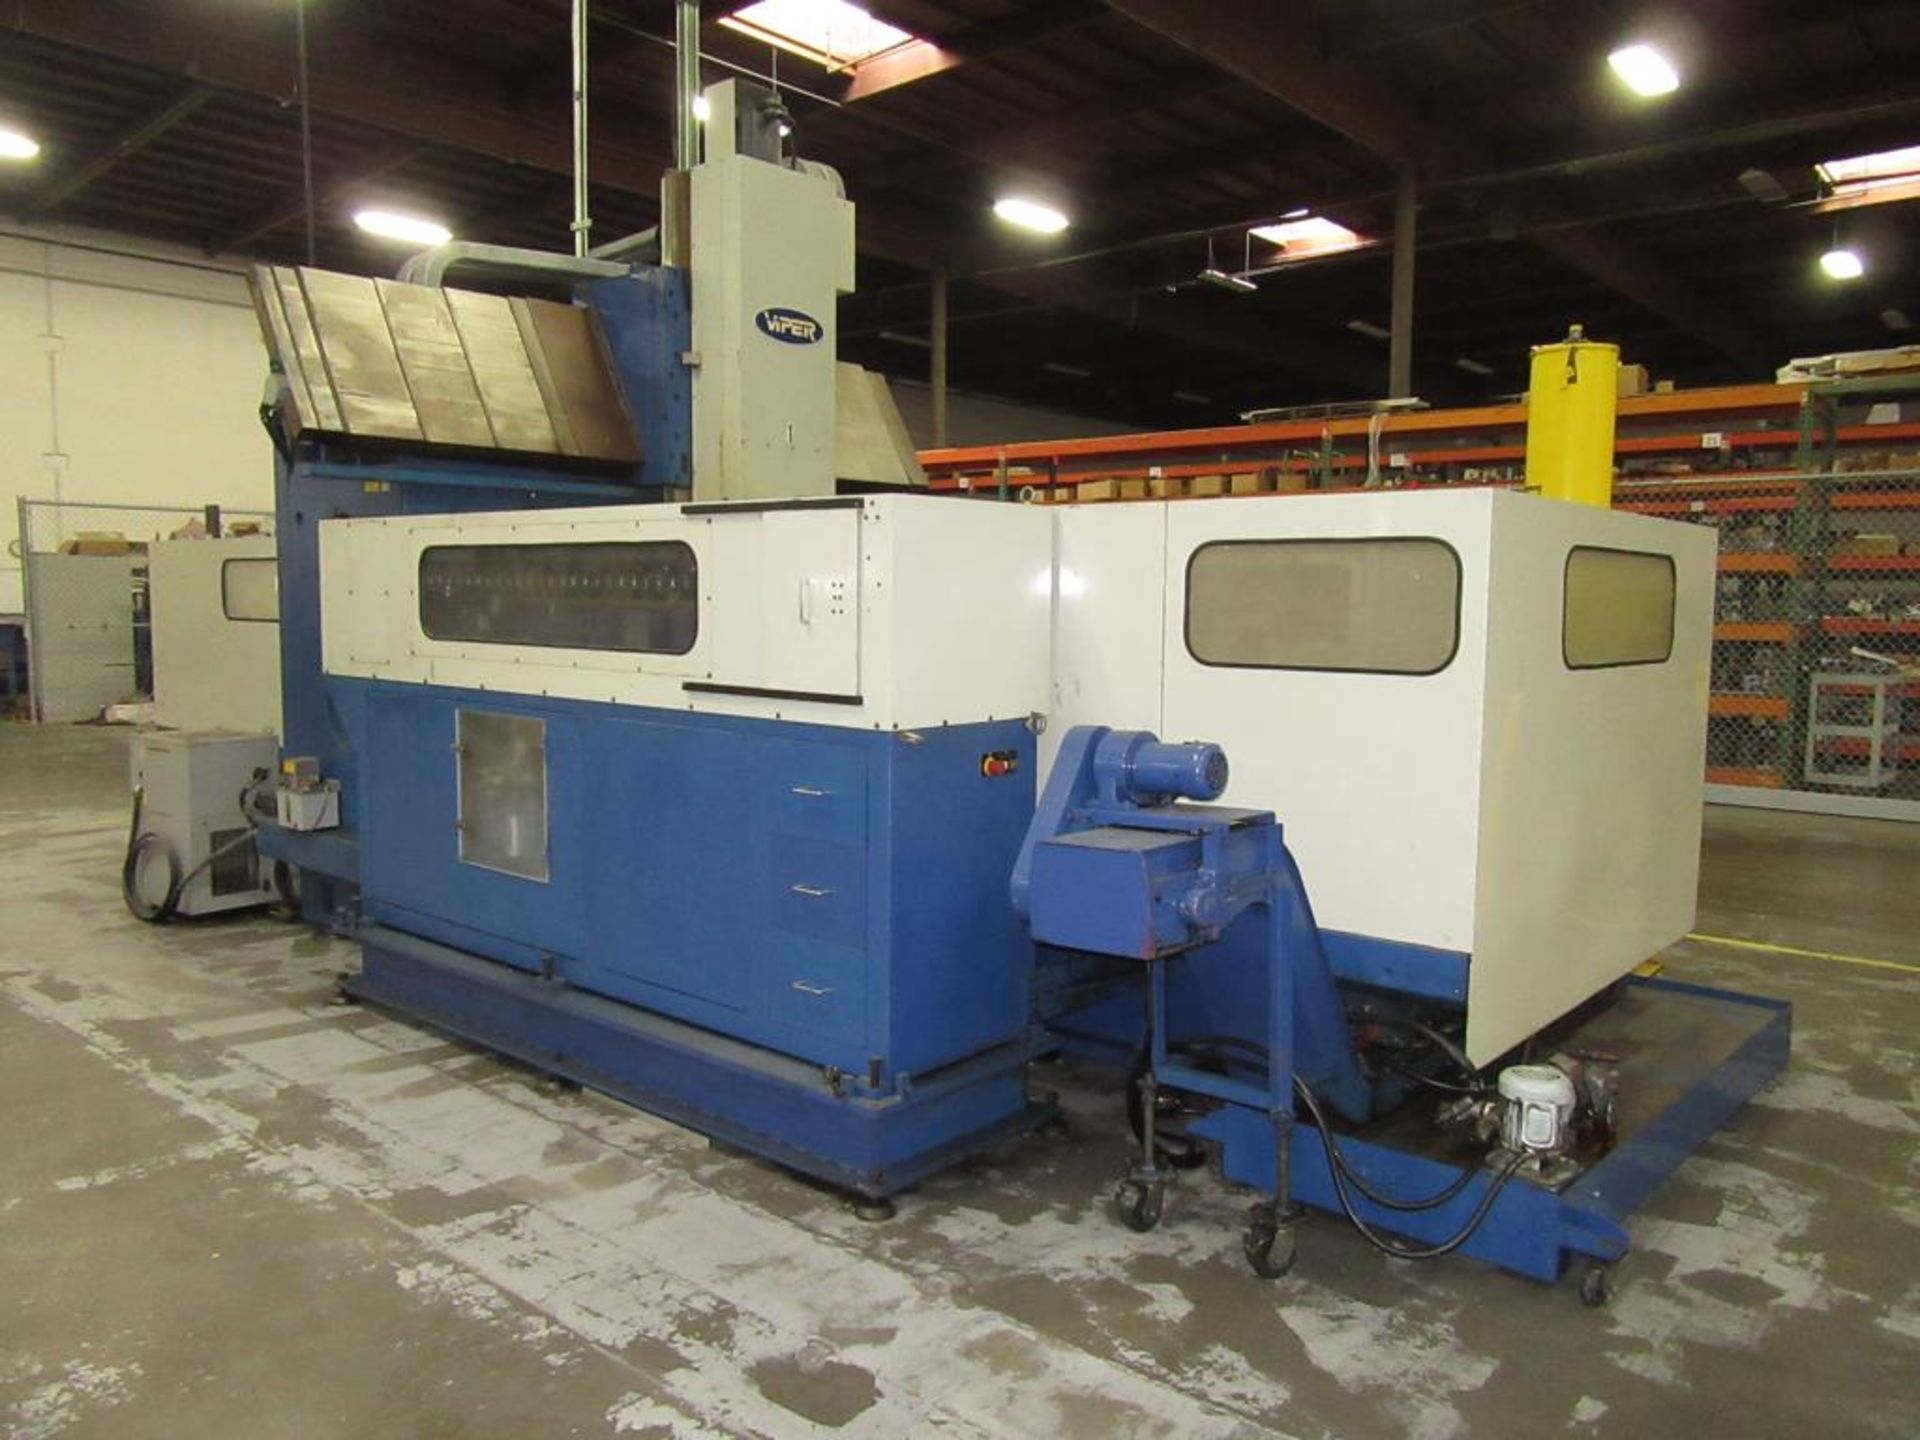 Viper HB-130W. 1997 - CNC Vertical Bridge Mill with Mitsubishi 3-Axis Control Panel, Table Size - Image 15 of 22